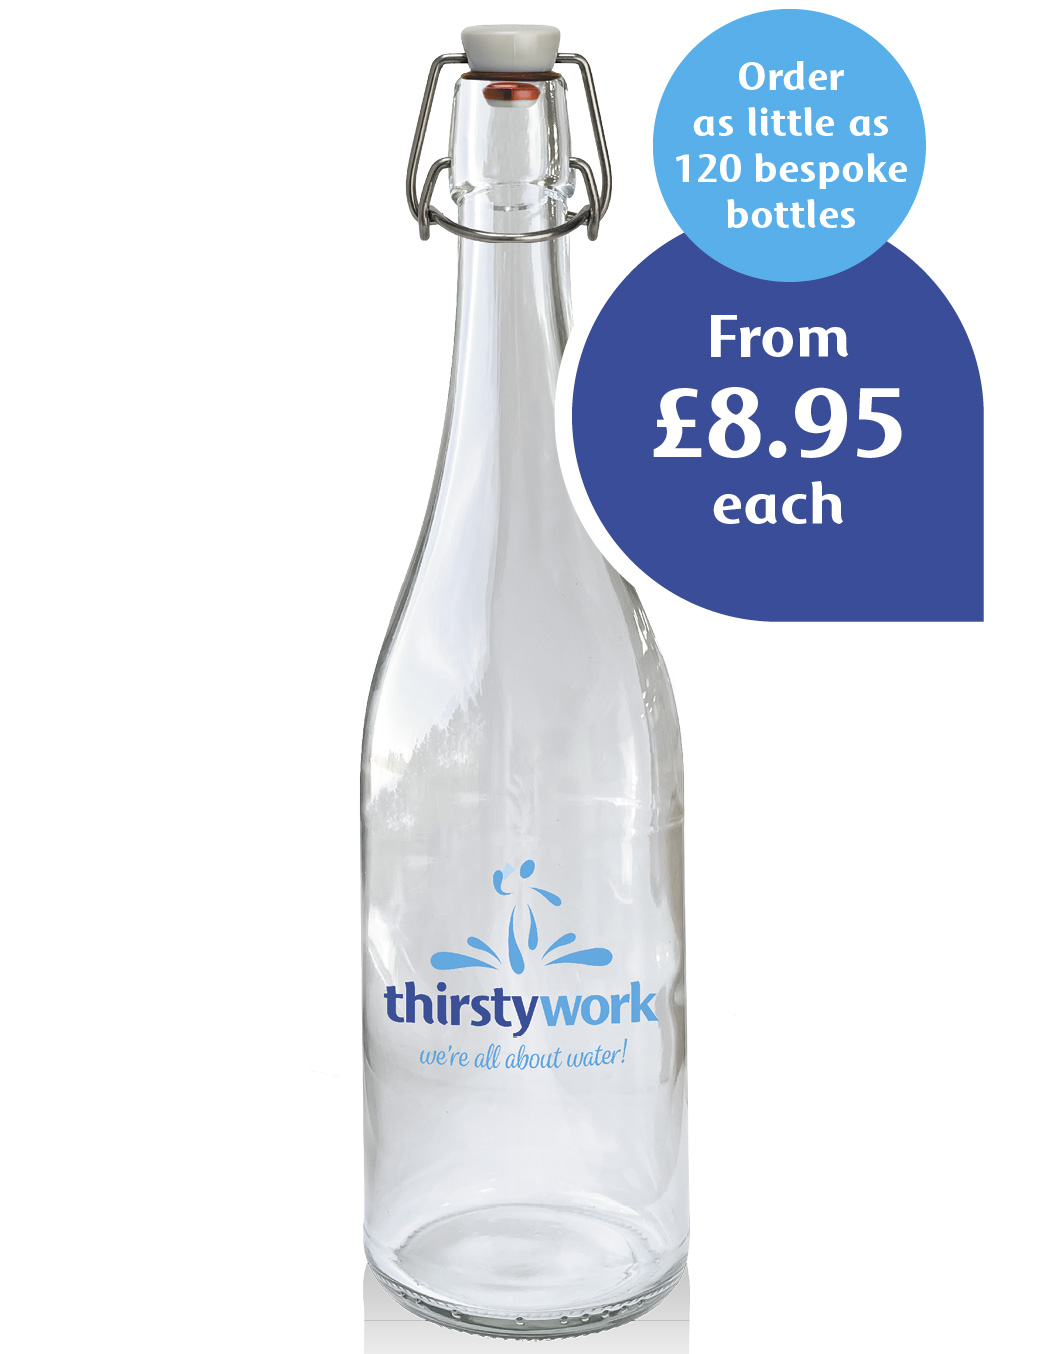 pura glass bottles personalised with your brand